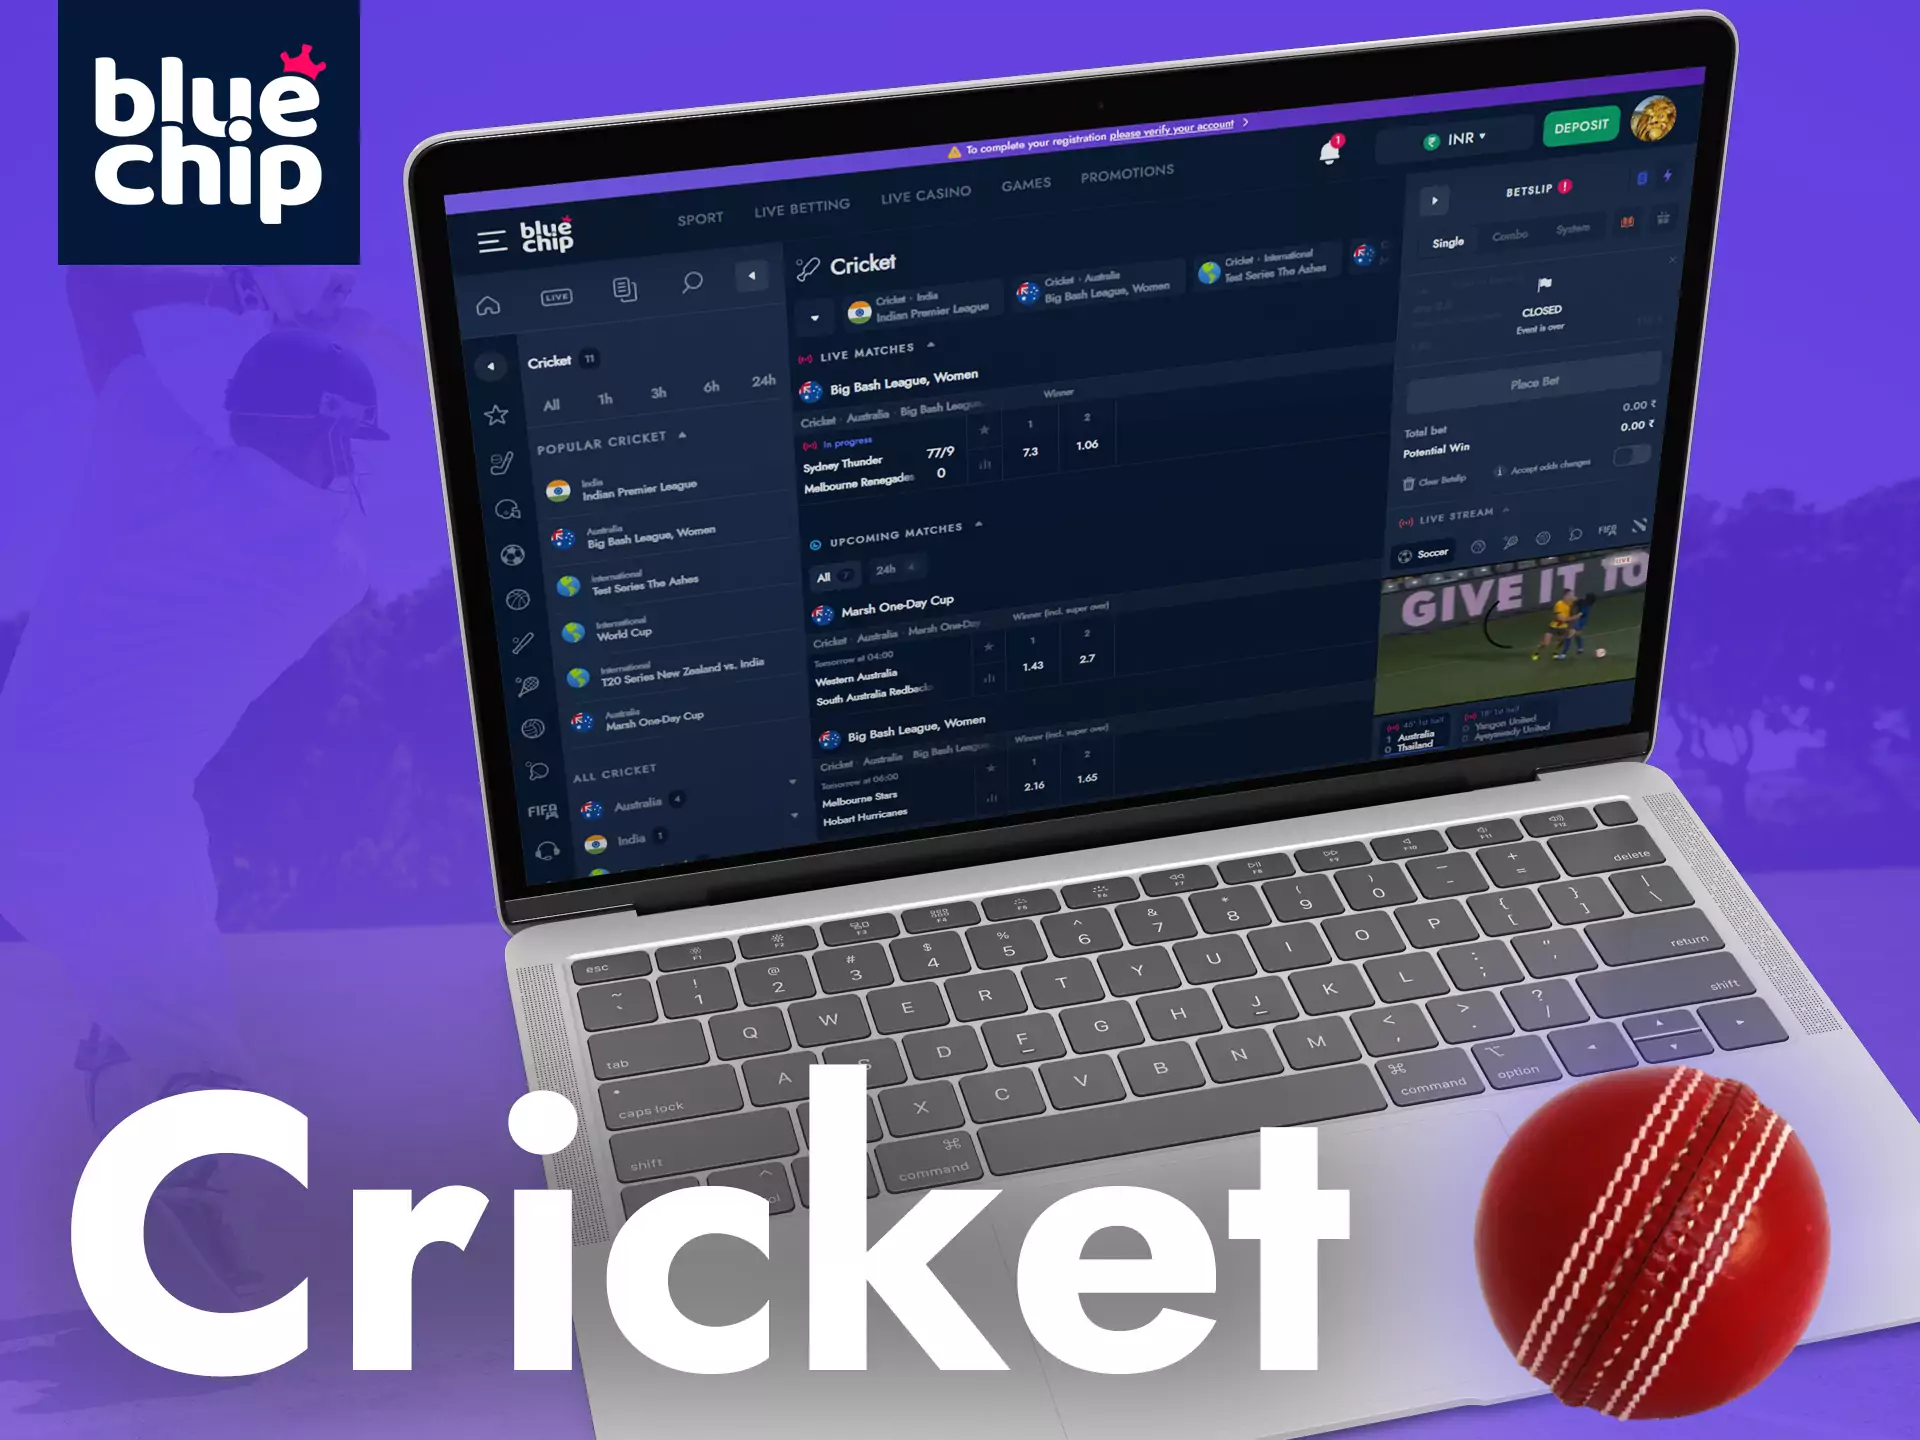 On Bluechip, cricket is one of the most popular sports sections in the sportsbook.